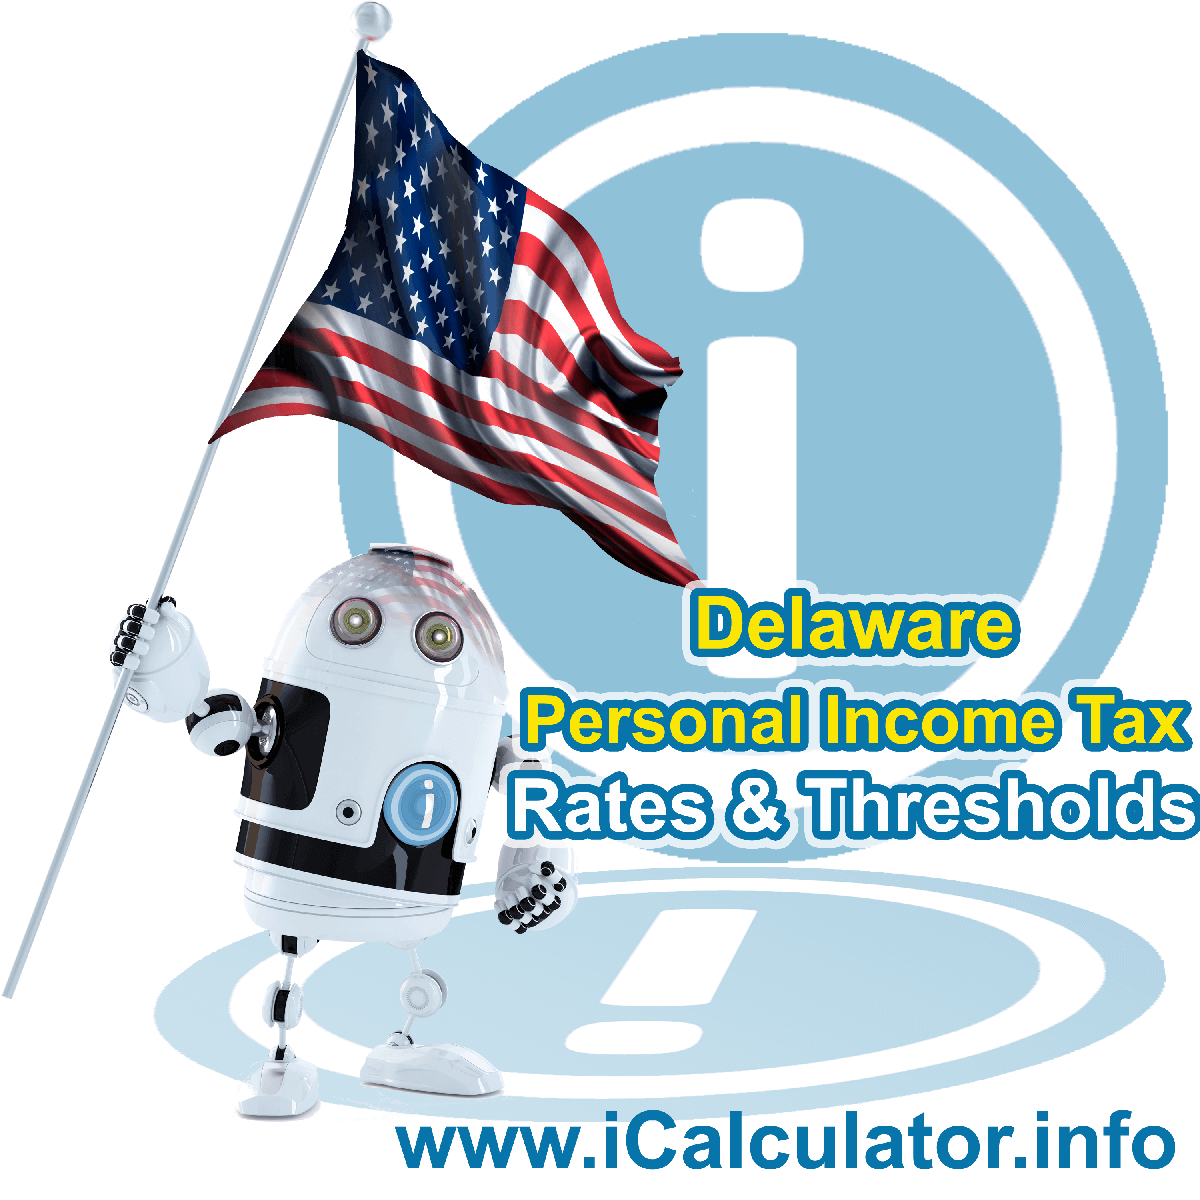 Delaware State Tax Tables 2017. This image displays details of the Delaware State Tax Tables for the 2017 tax return year which is provided in support of the 2017 US Tax Calculator